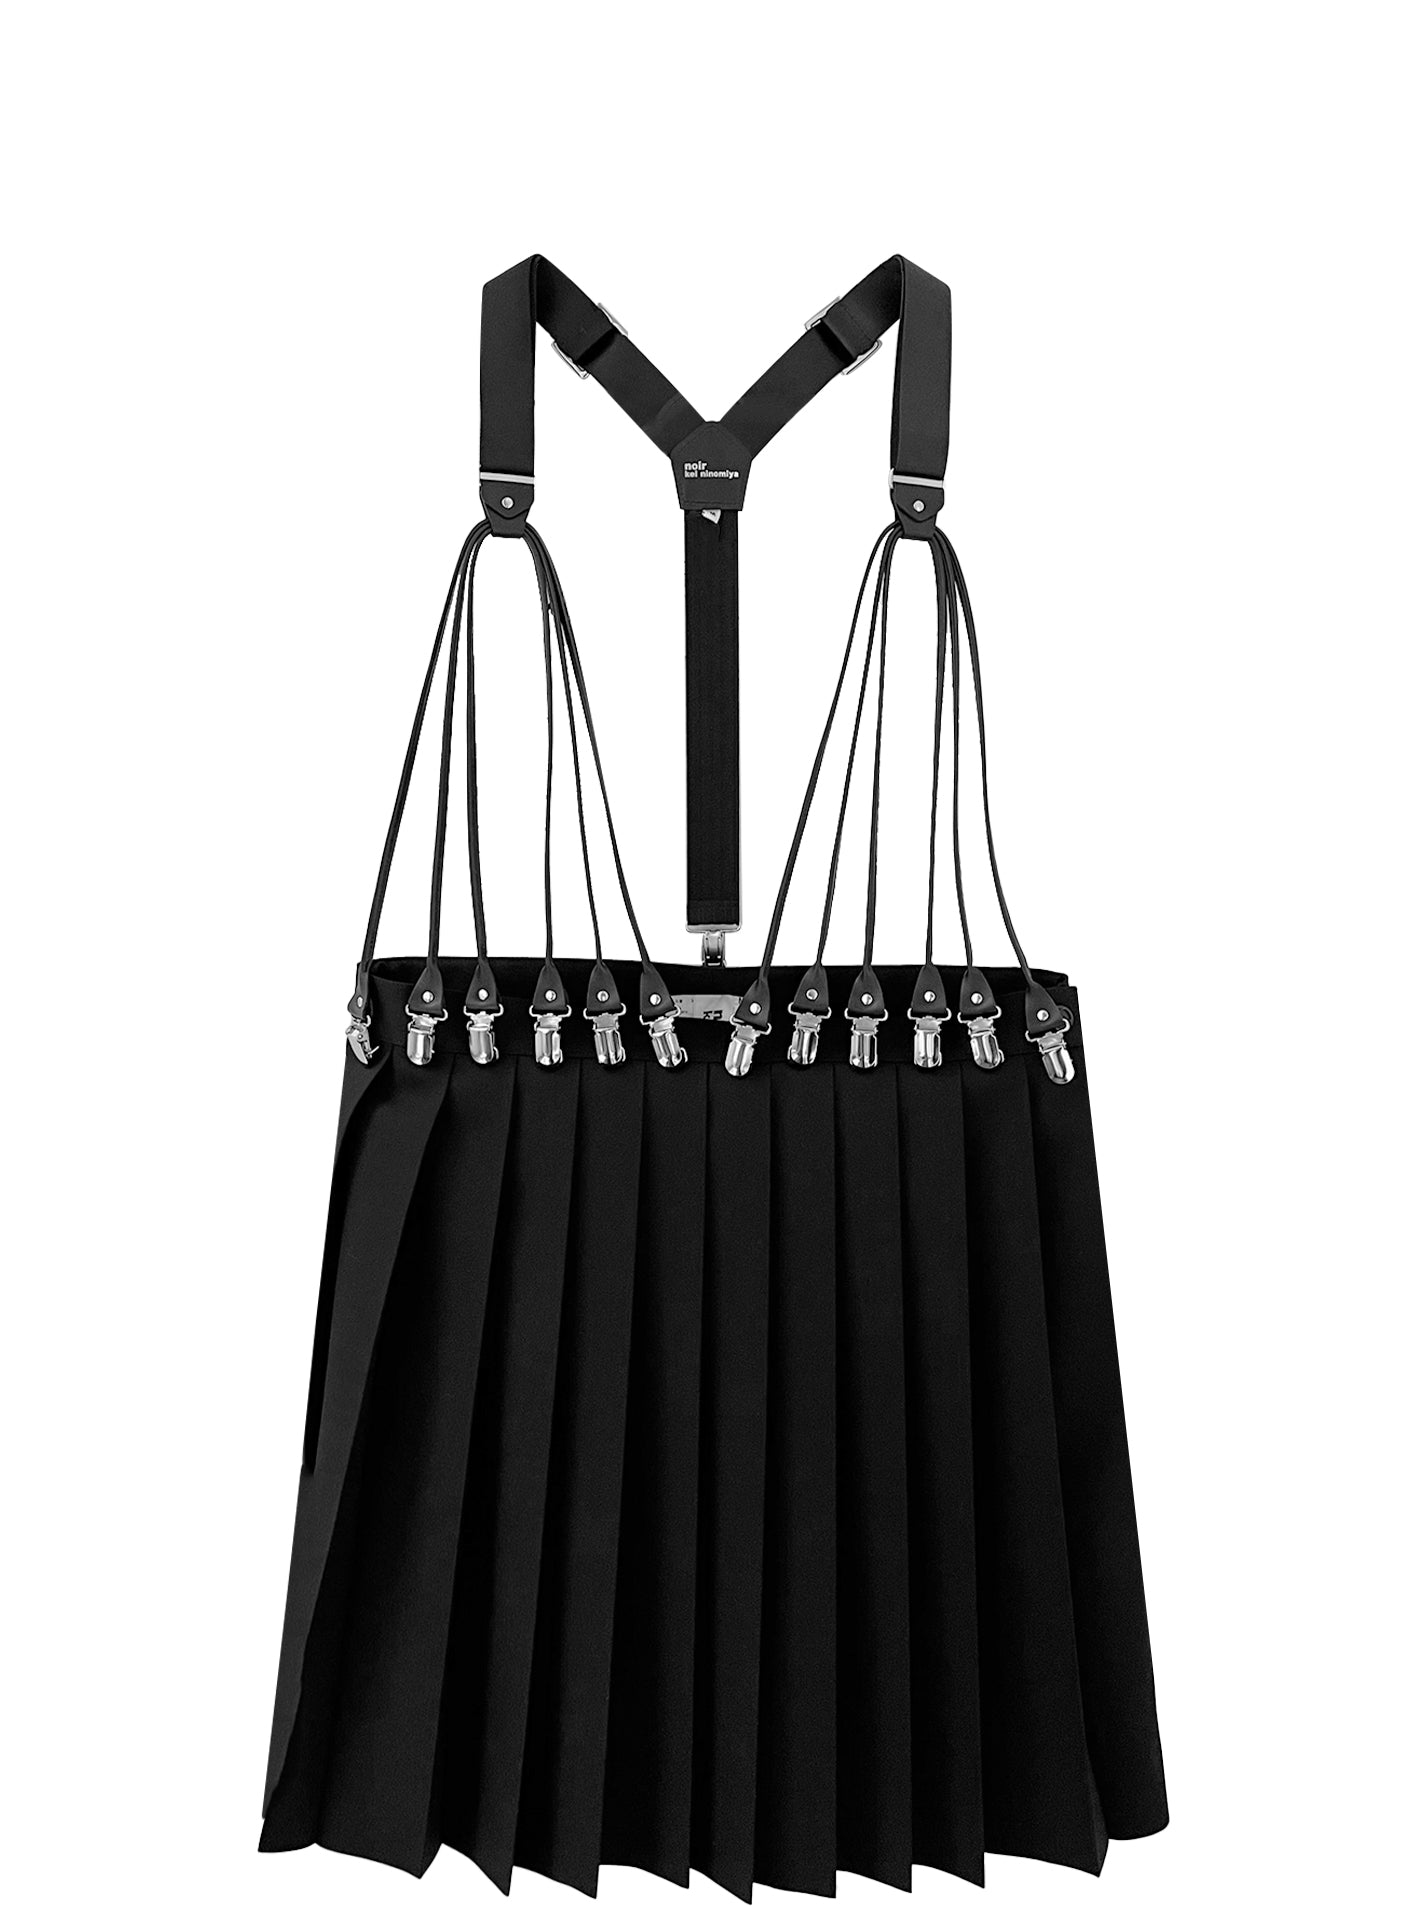 PLEATED SKIRT PINAFORE